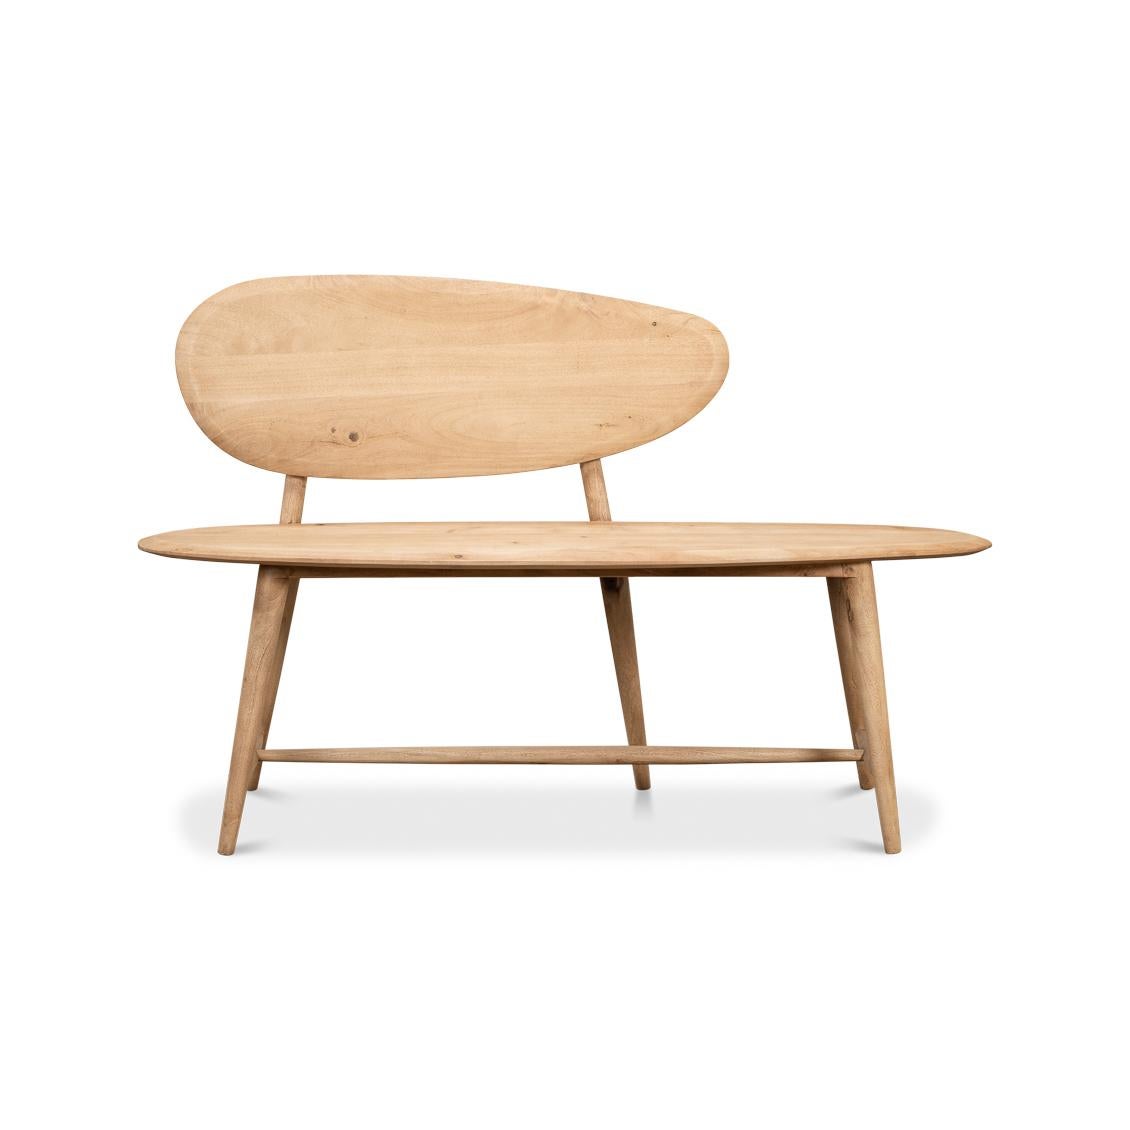 This bench has a flair for the arts and is inspired by boulders and pebbles found in natural landscapes. It is hand-crafted and carved out of solid acacia and has a natural finish. Its unique abstract design makes it a true conversation